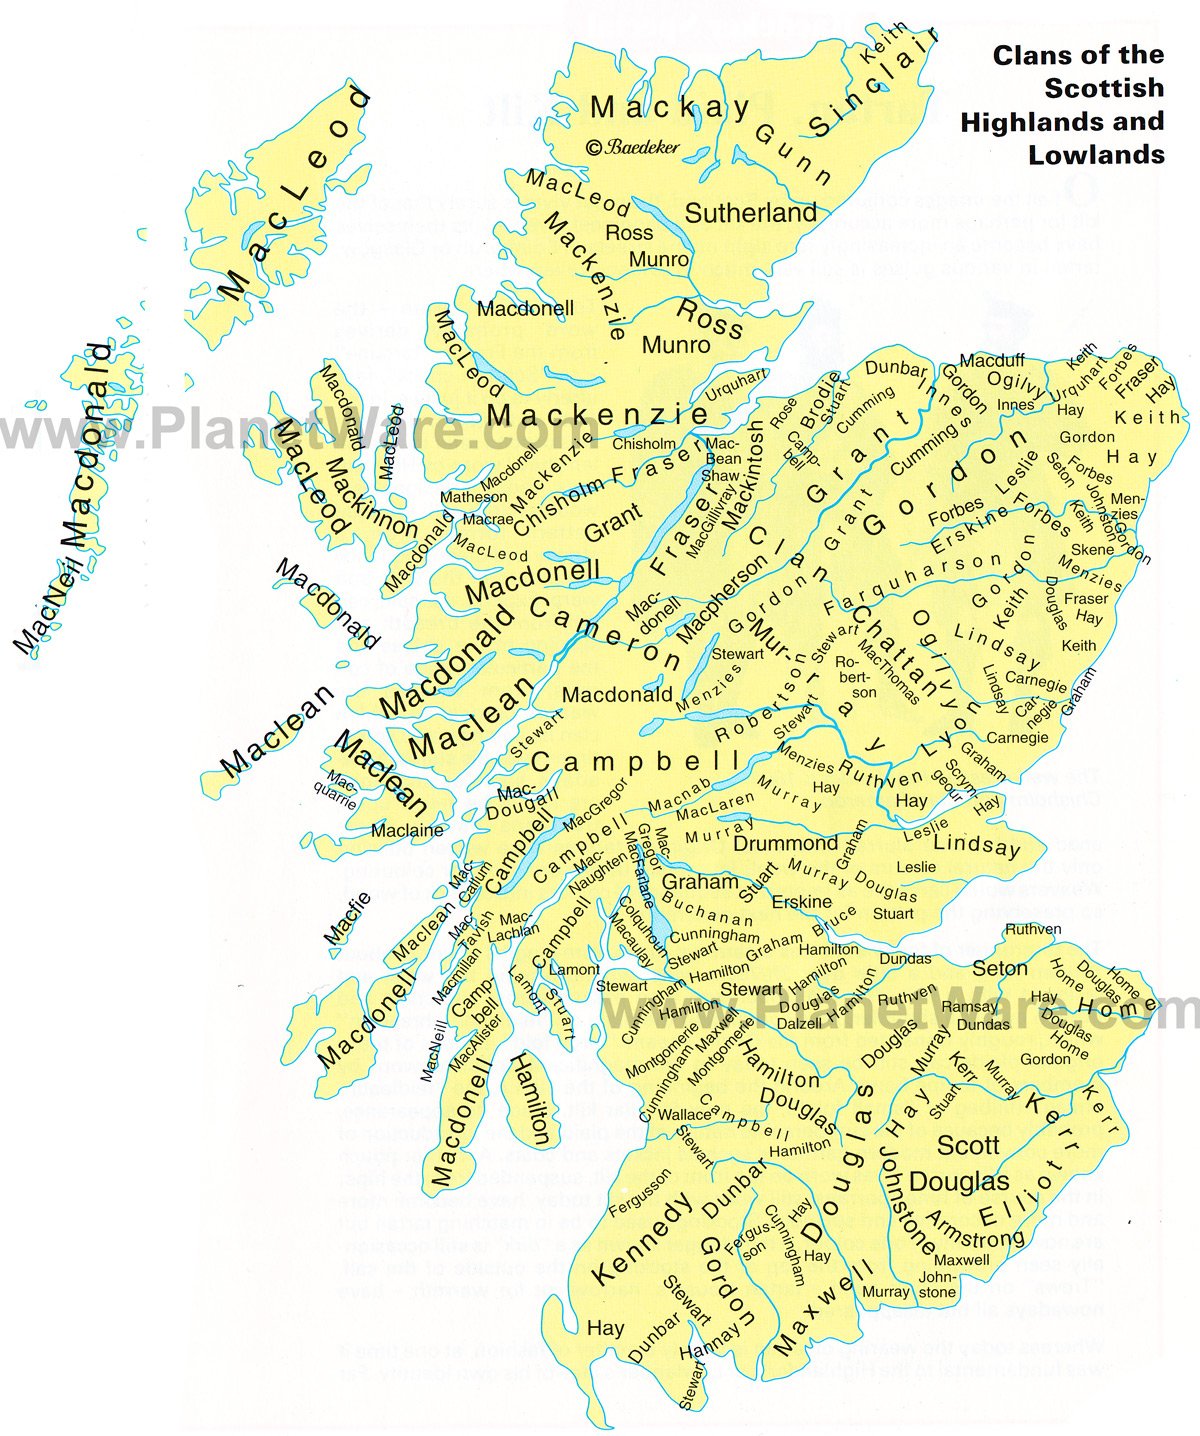 clans-of-the-scottish-highlands-and-lowlands-map.jpg